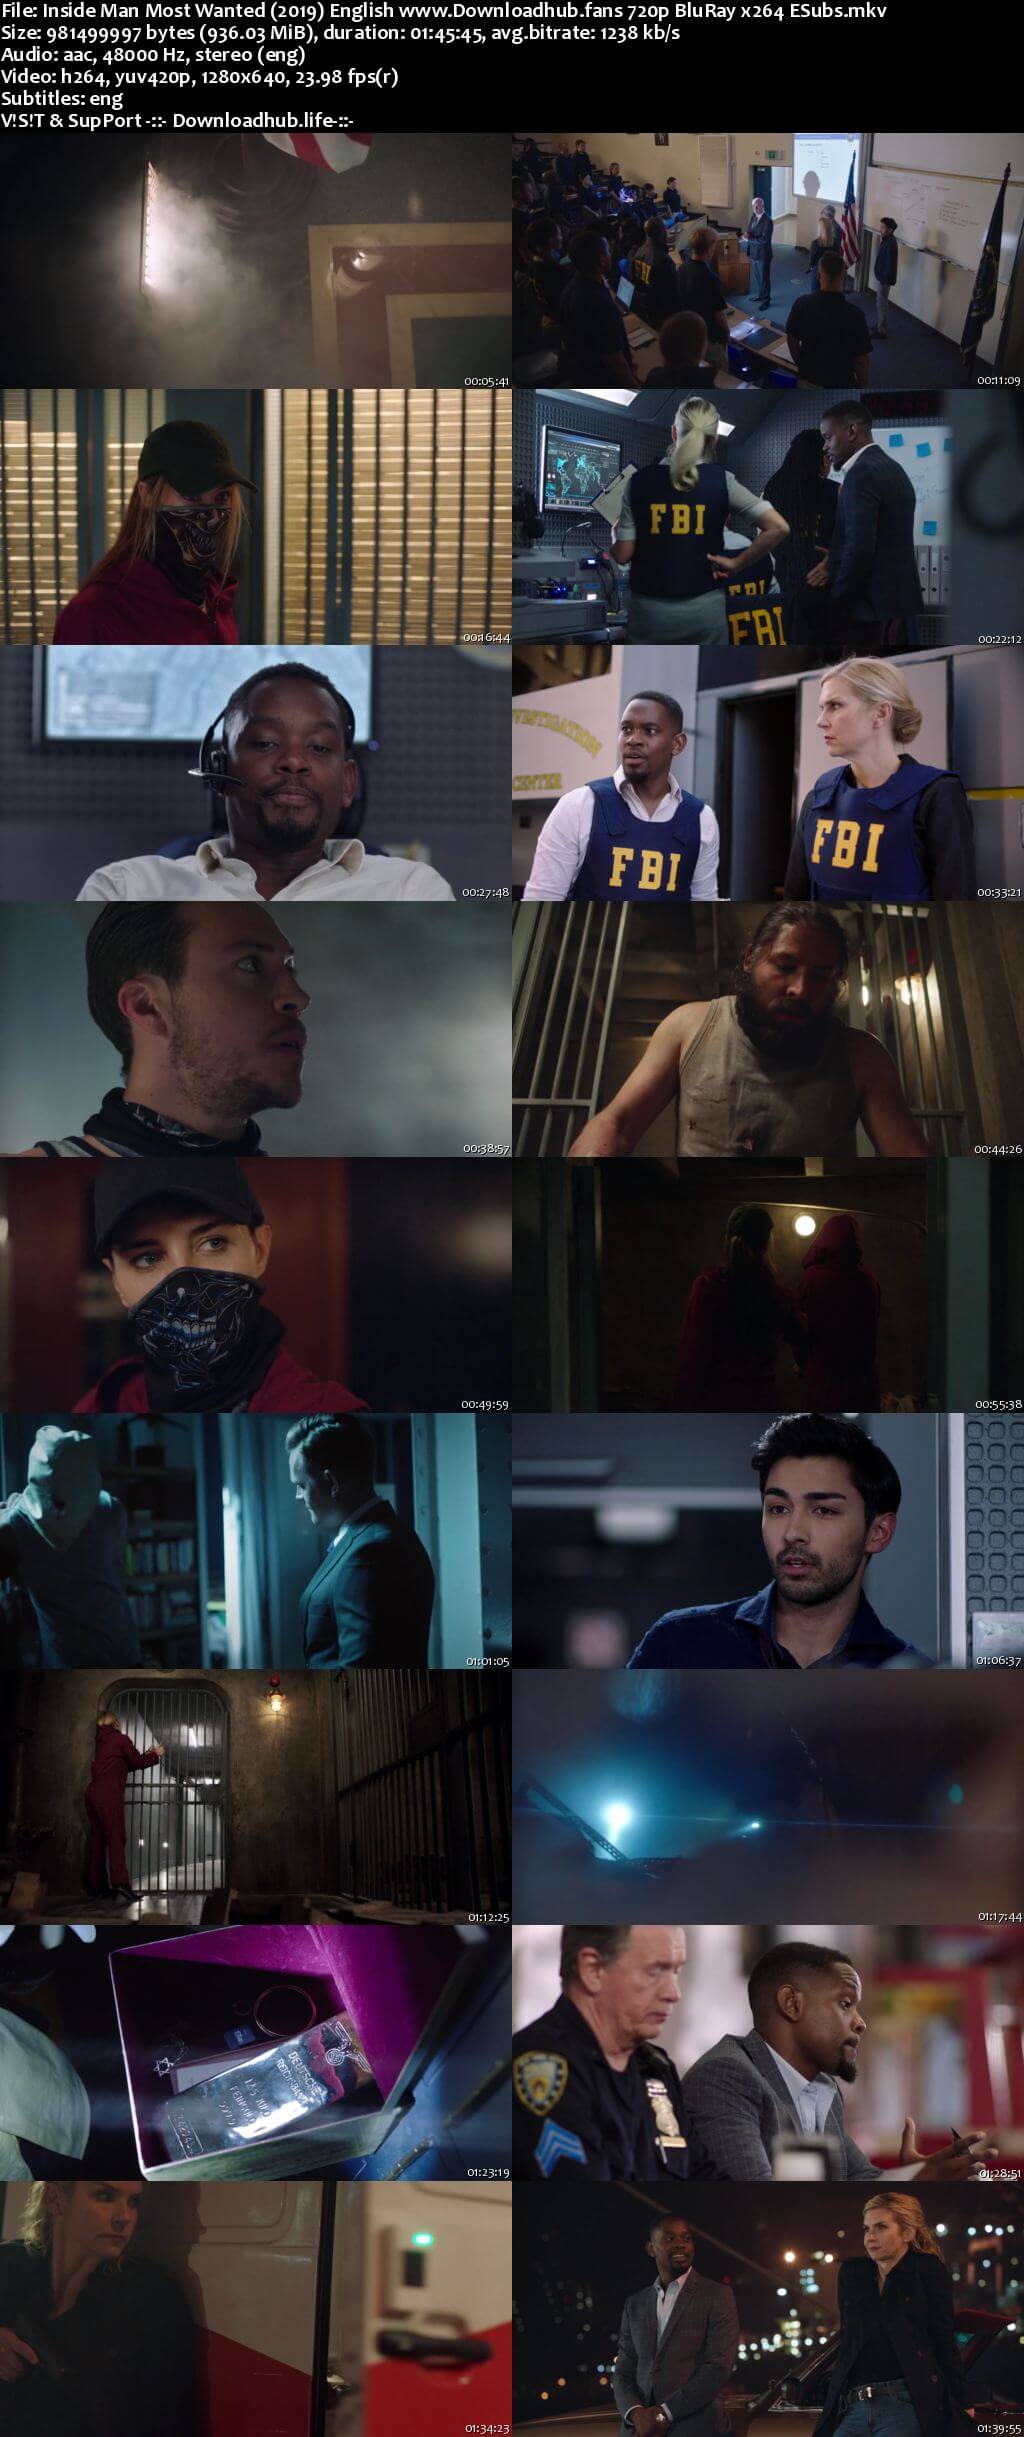 Inside Man Most Wanted 2019 English 720p Web-DL 900MB ESubs